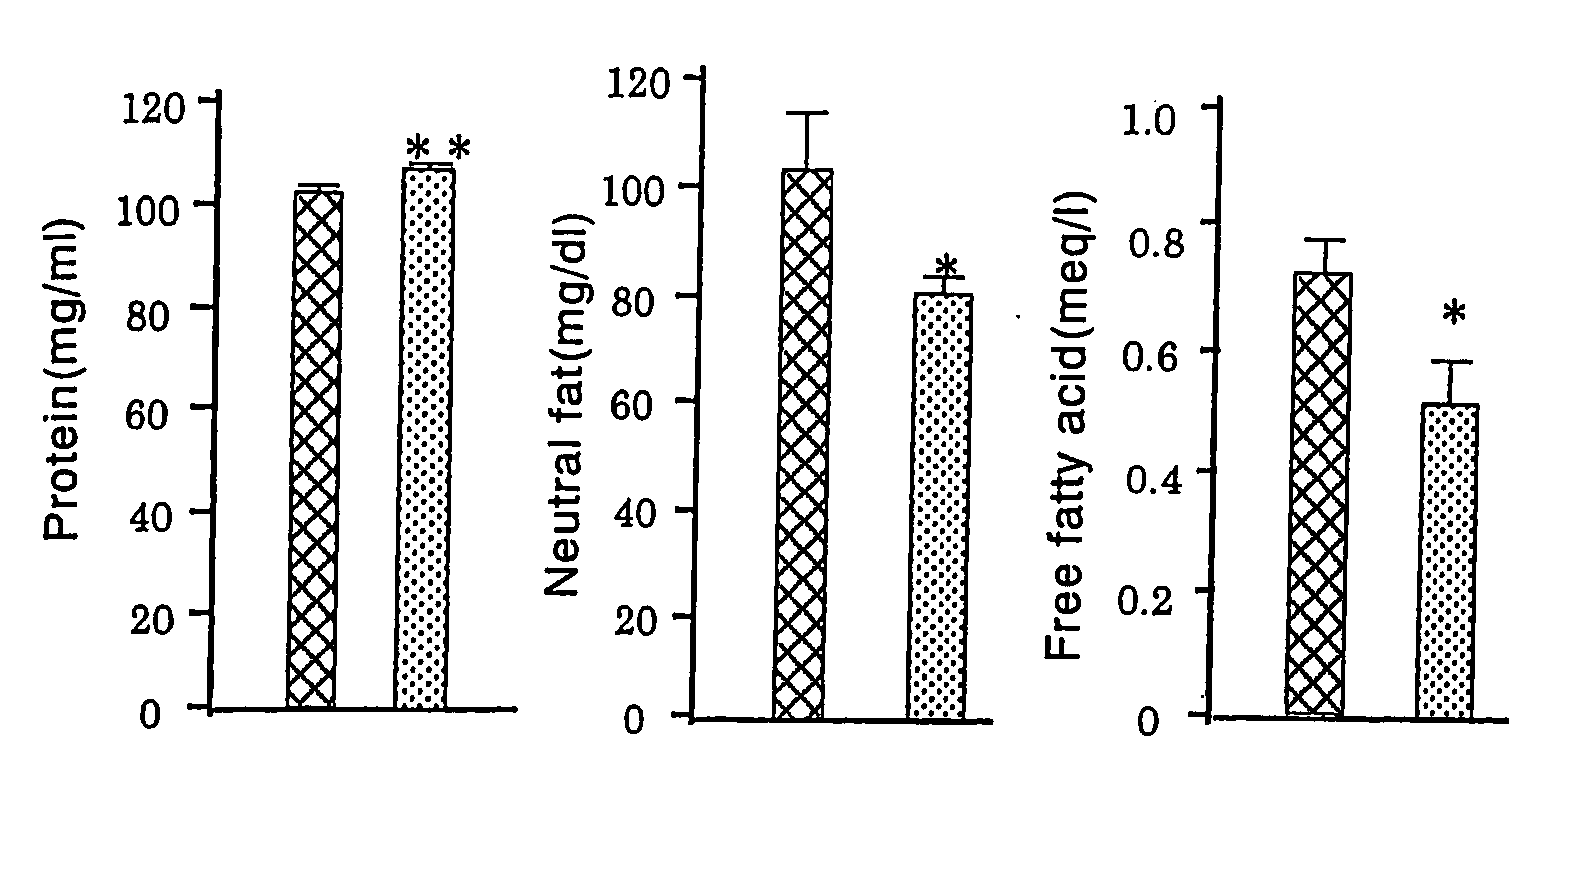 Methods for improved lipid metabolism and basal metabolic rate with lactoferrin